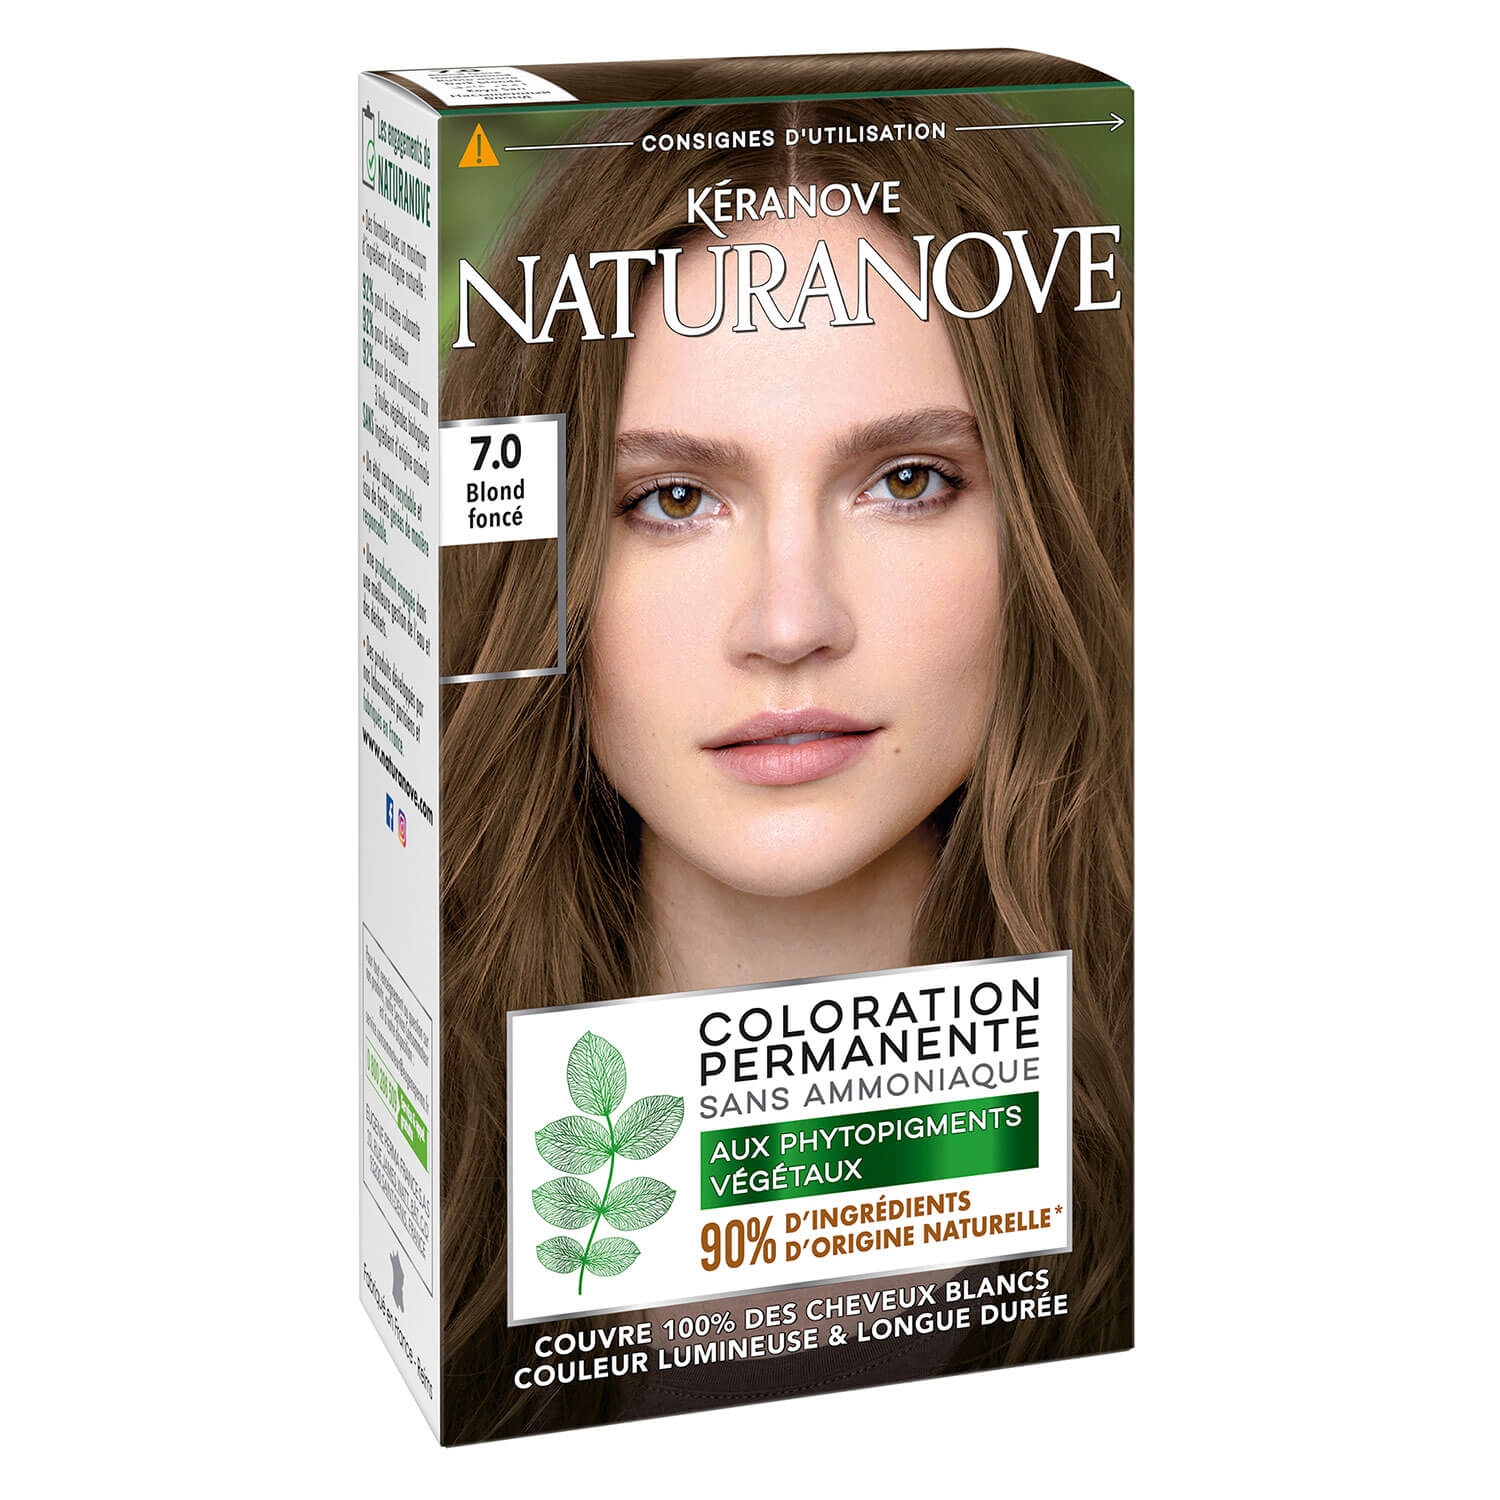 Product image from Naturanove - Dauerhafte Haarfarbe Dunkelblond 7.0